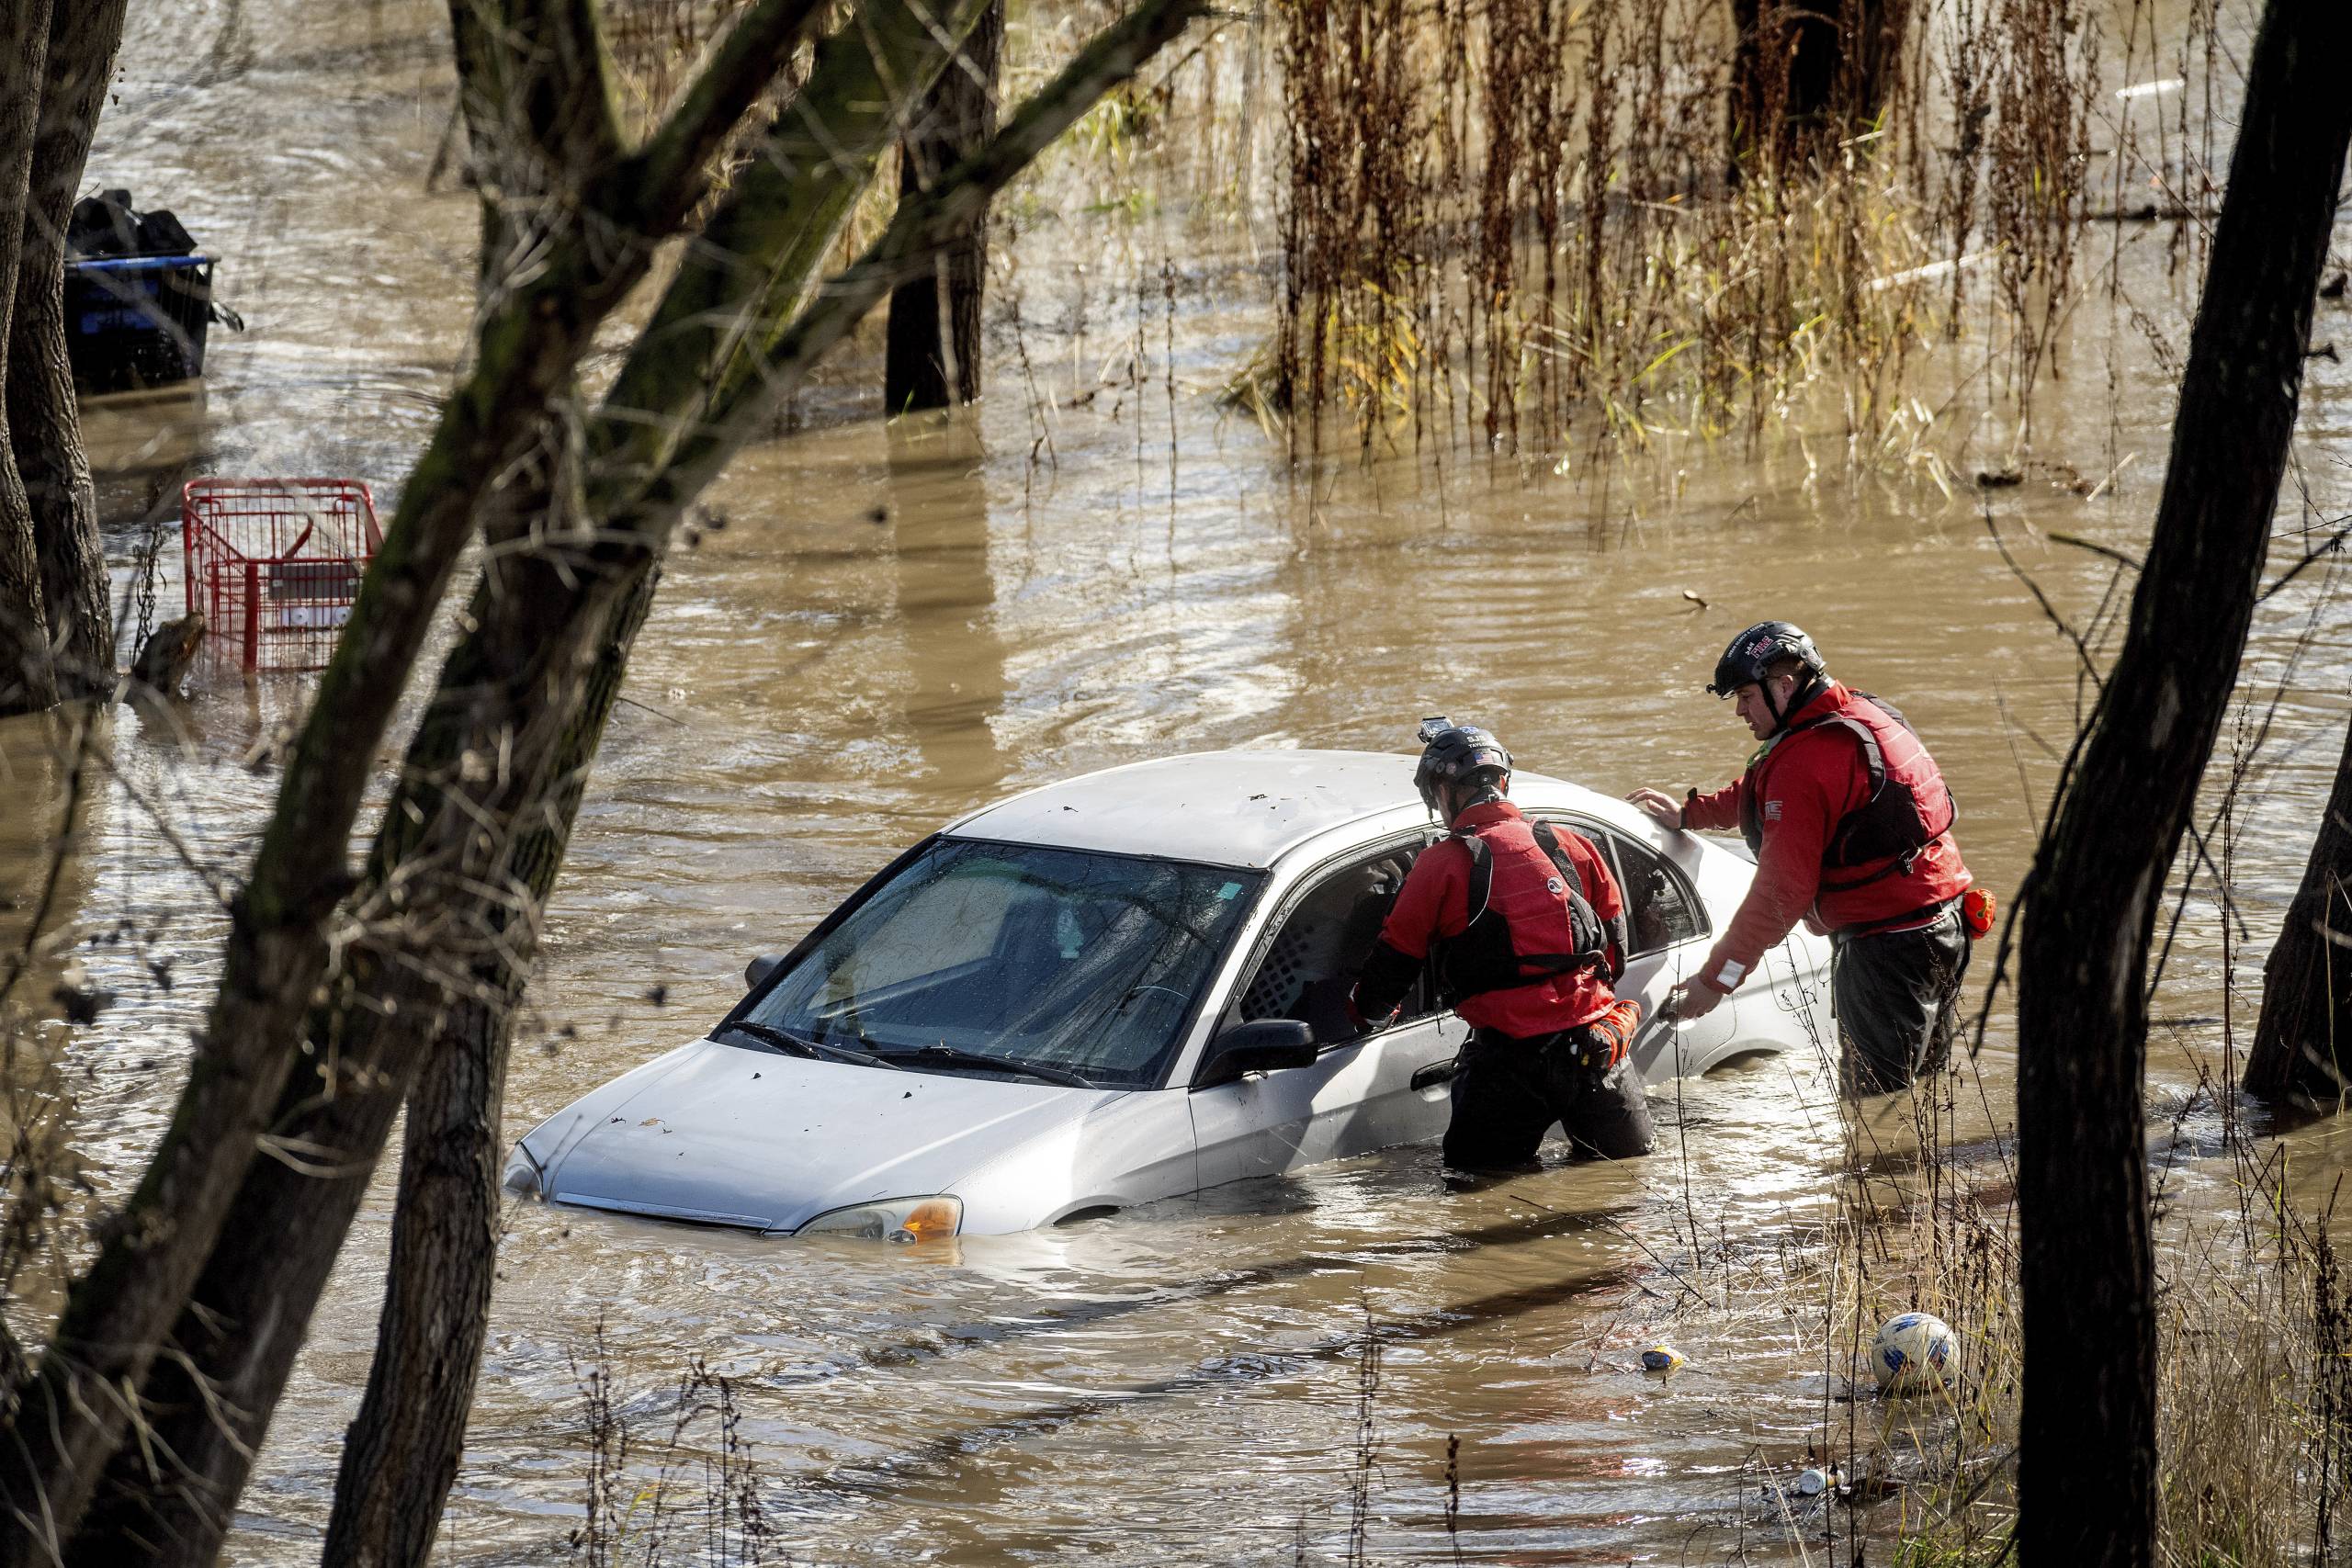 Search and rescue workers investigate a car surrounded by floodwater